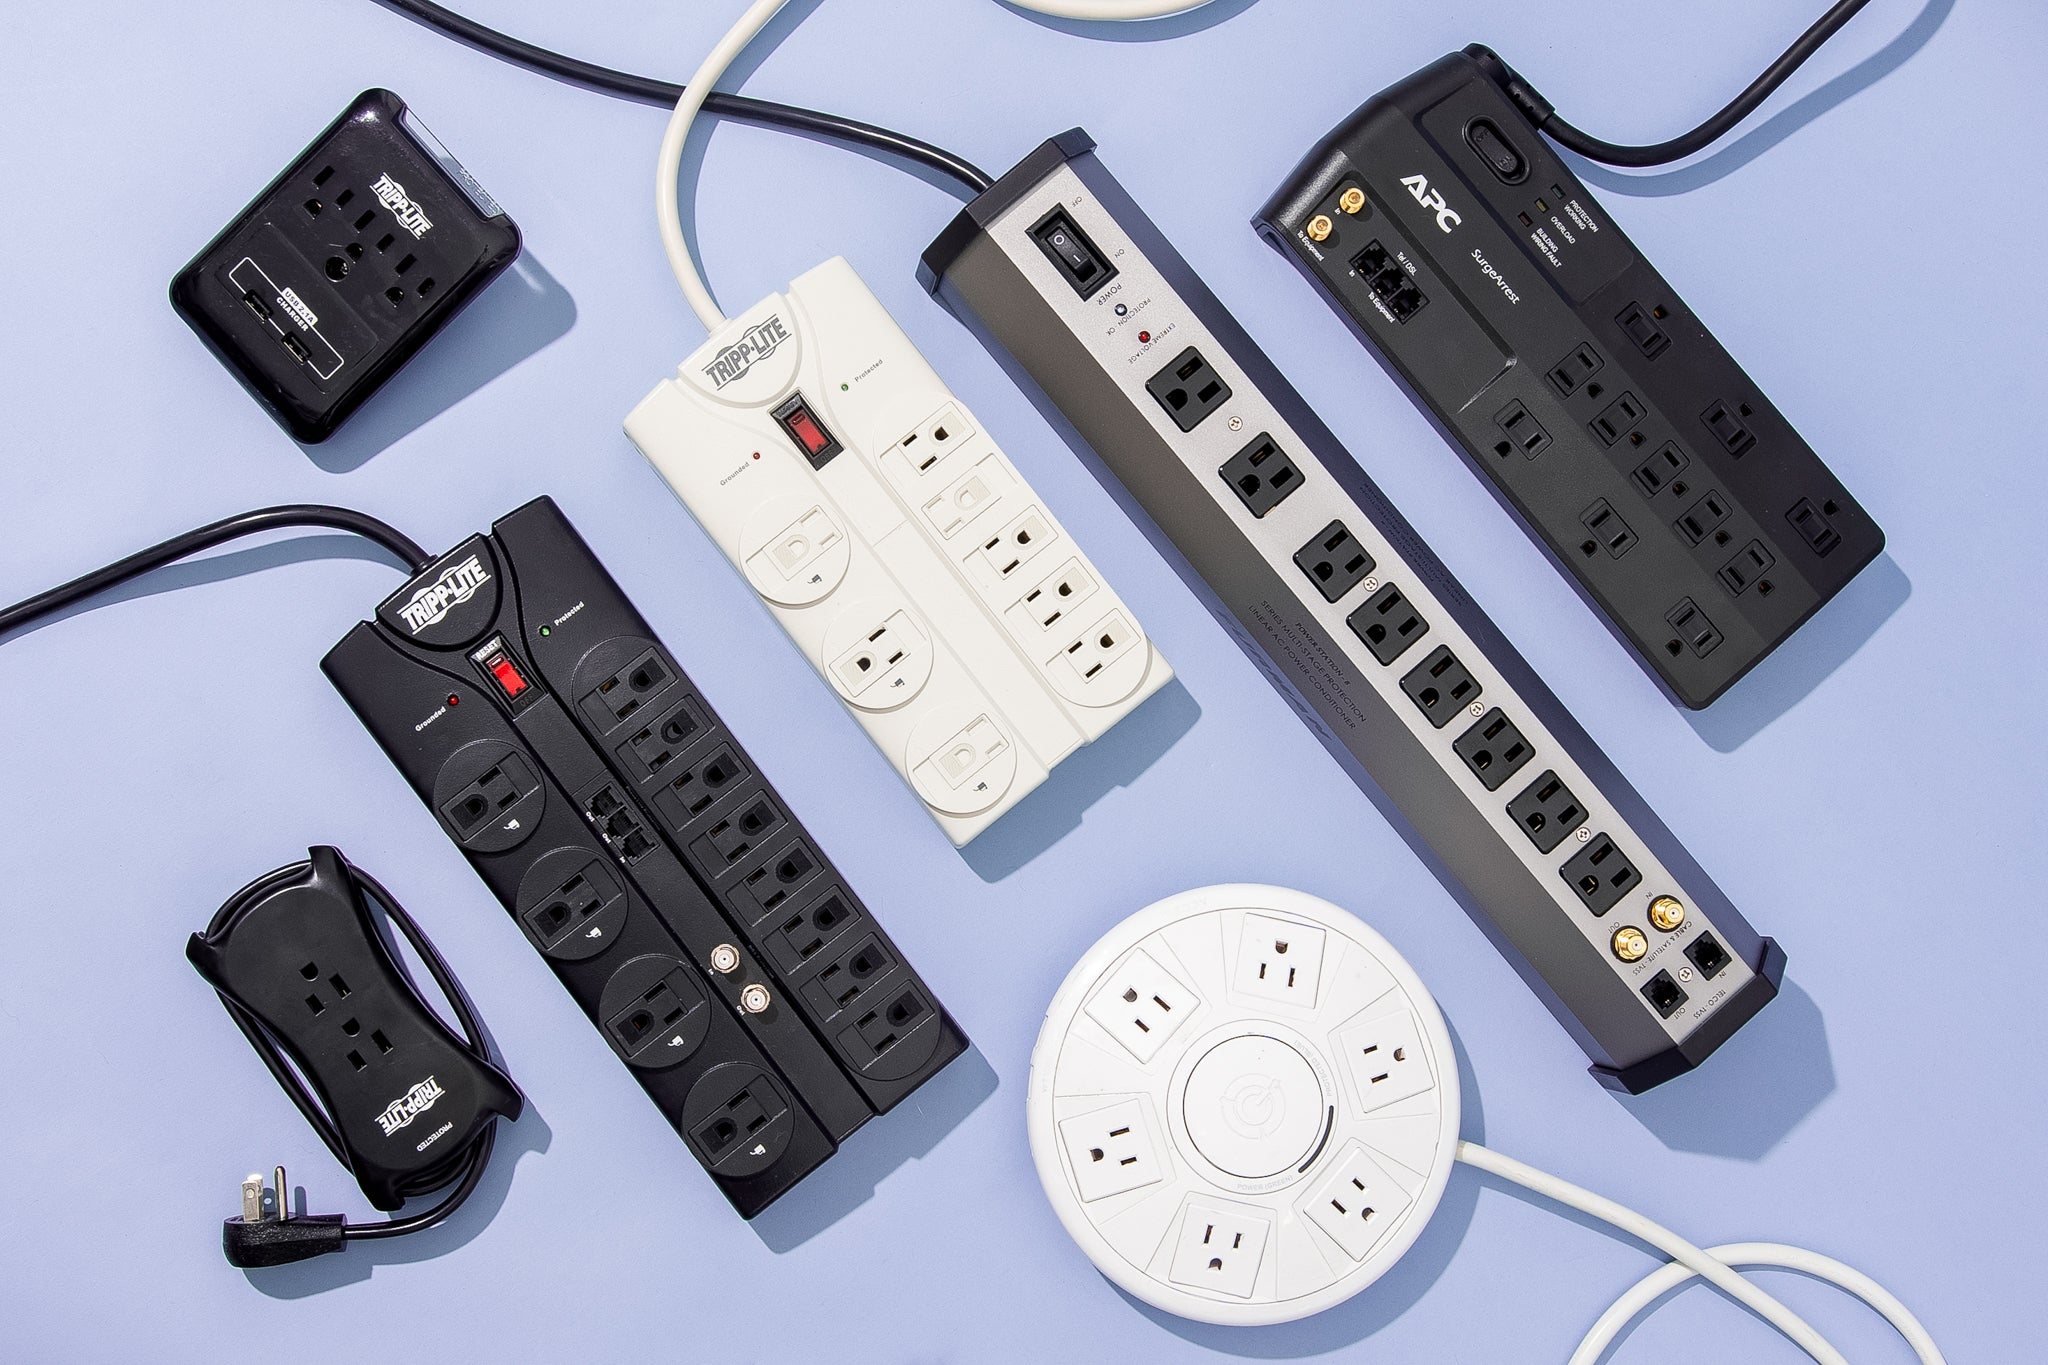 Install a surge protector to prevent power surges from damaging your electrical system
If you suspect a power surge damaged your system, contact an electrician to assess the damage and make necessary repairs